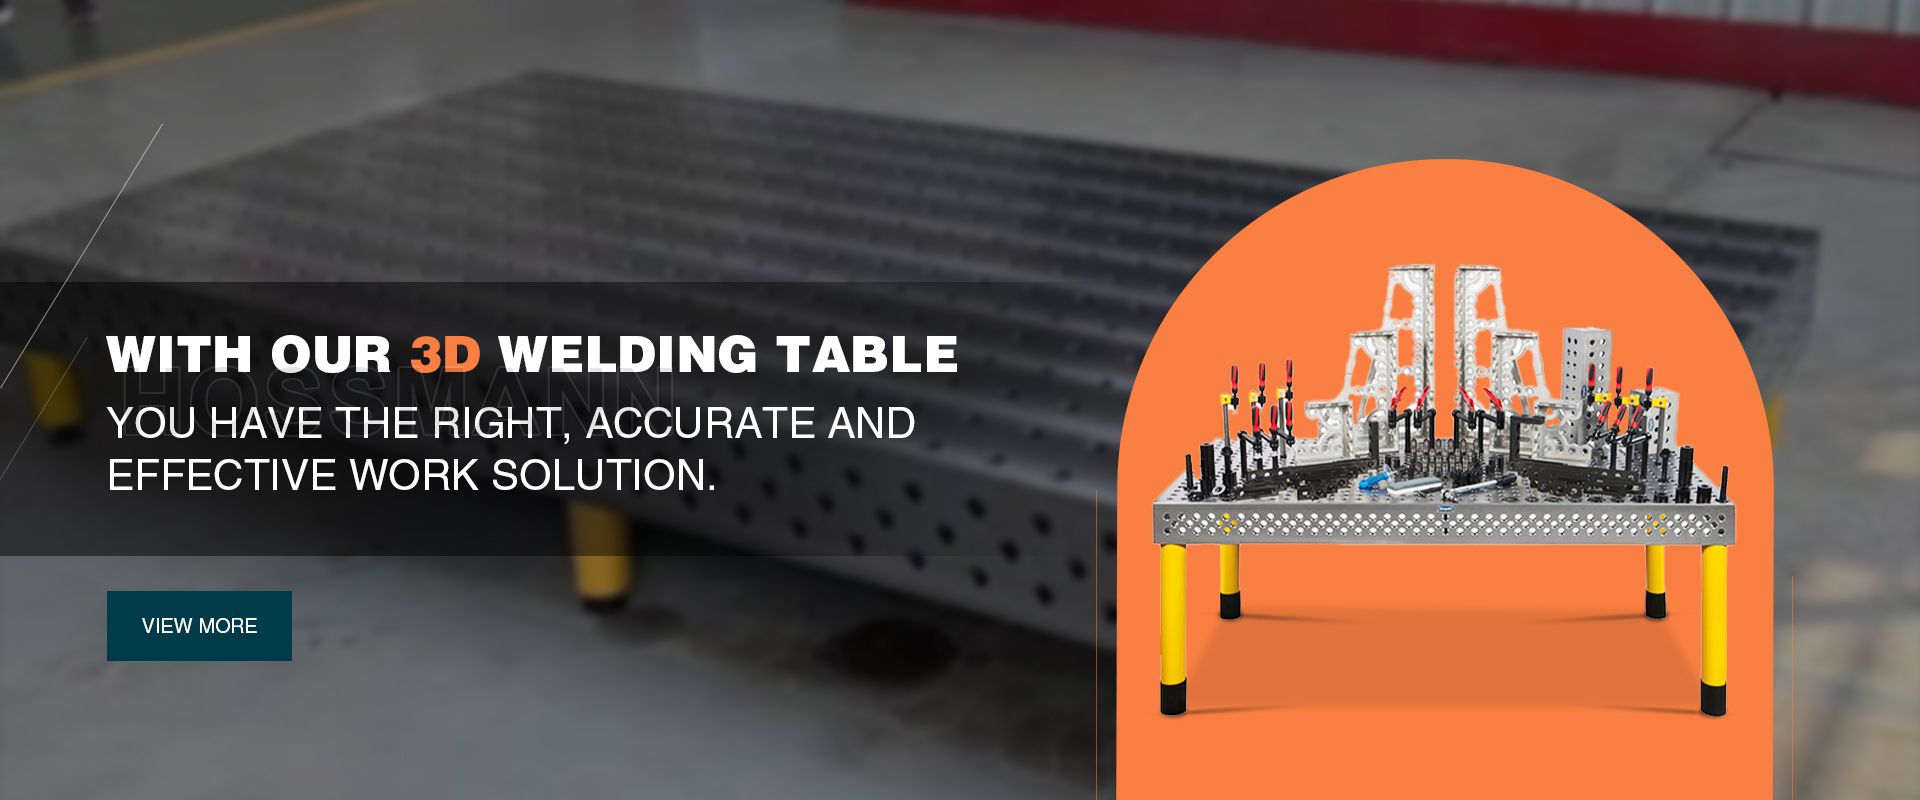 3D Welding Table With Clamping System